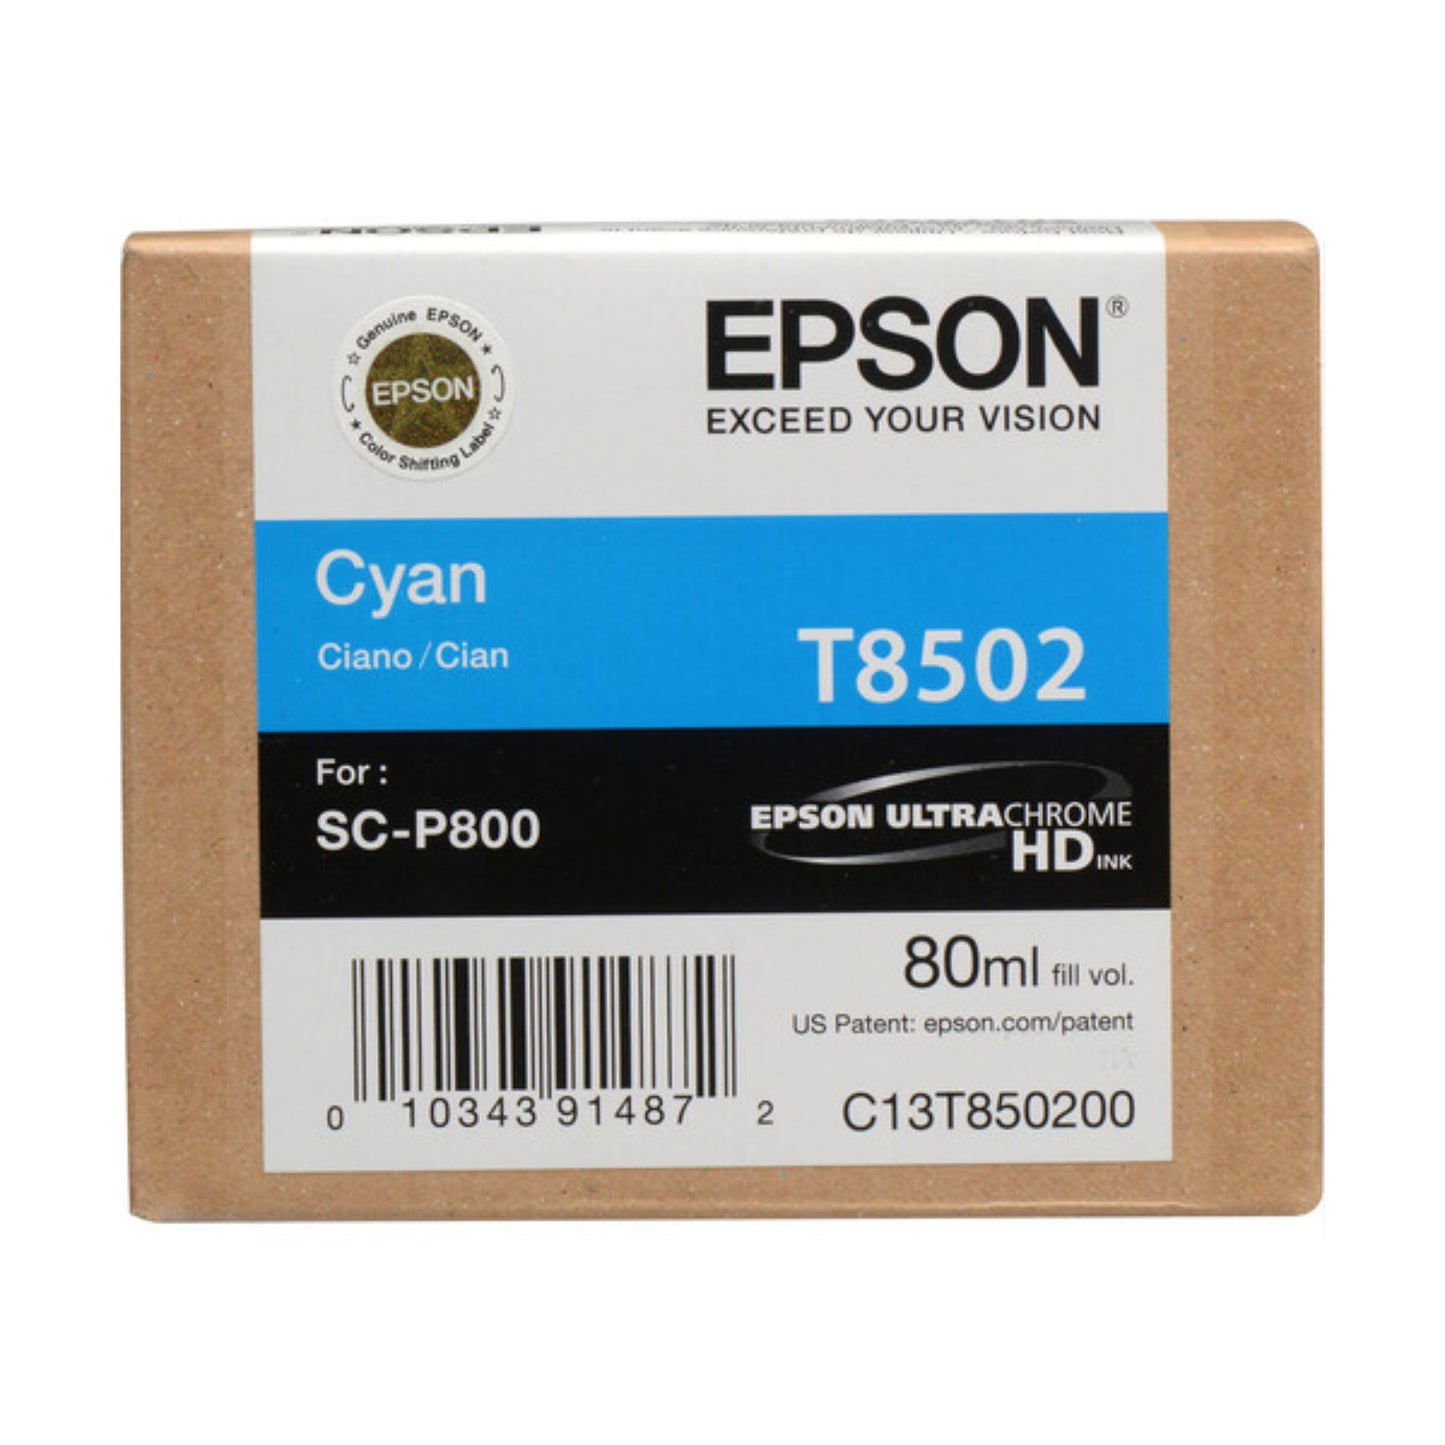 Buy Epson UltraChrome HD Ink Cartridge for SC-P800 Printer at Topic Store